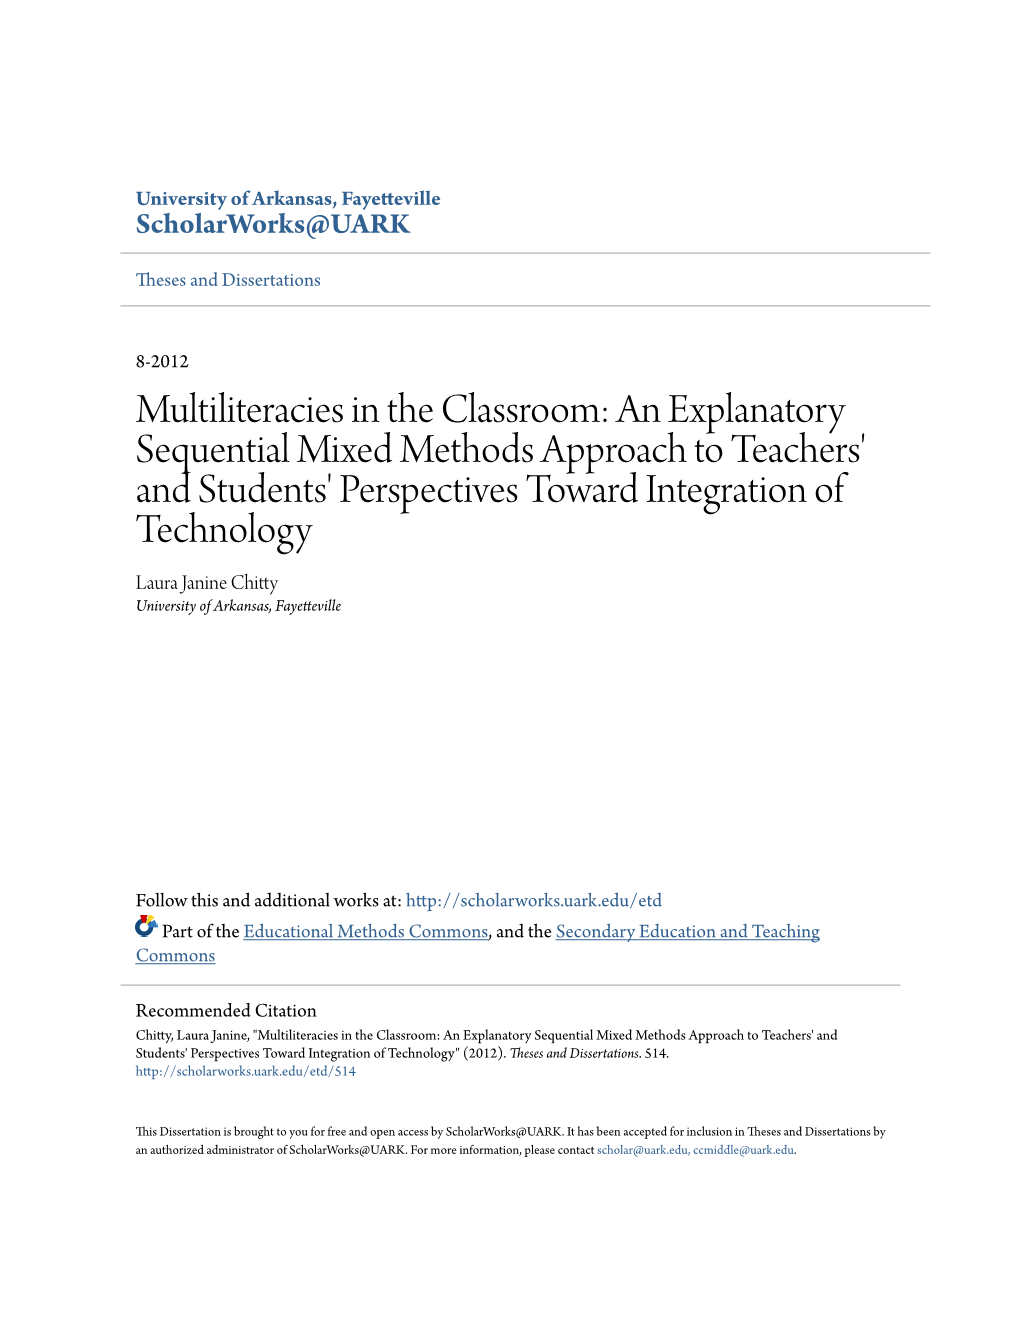 Multiliteracies in the Classroom: an Explanatory Sequential Mixed